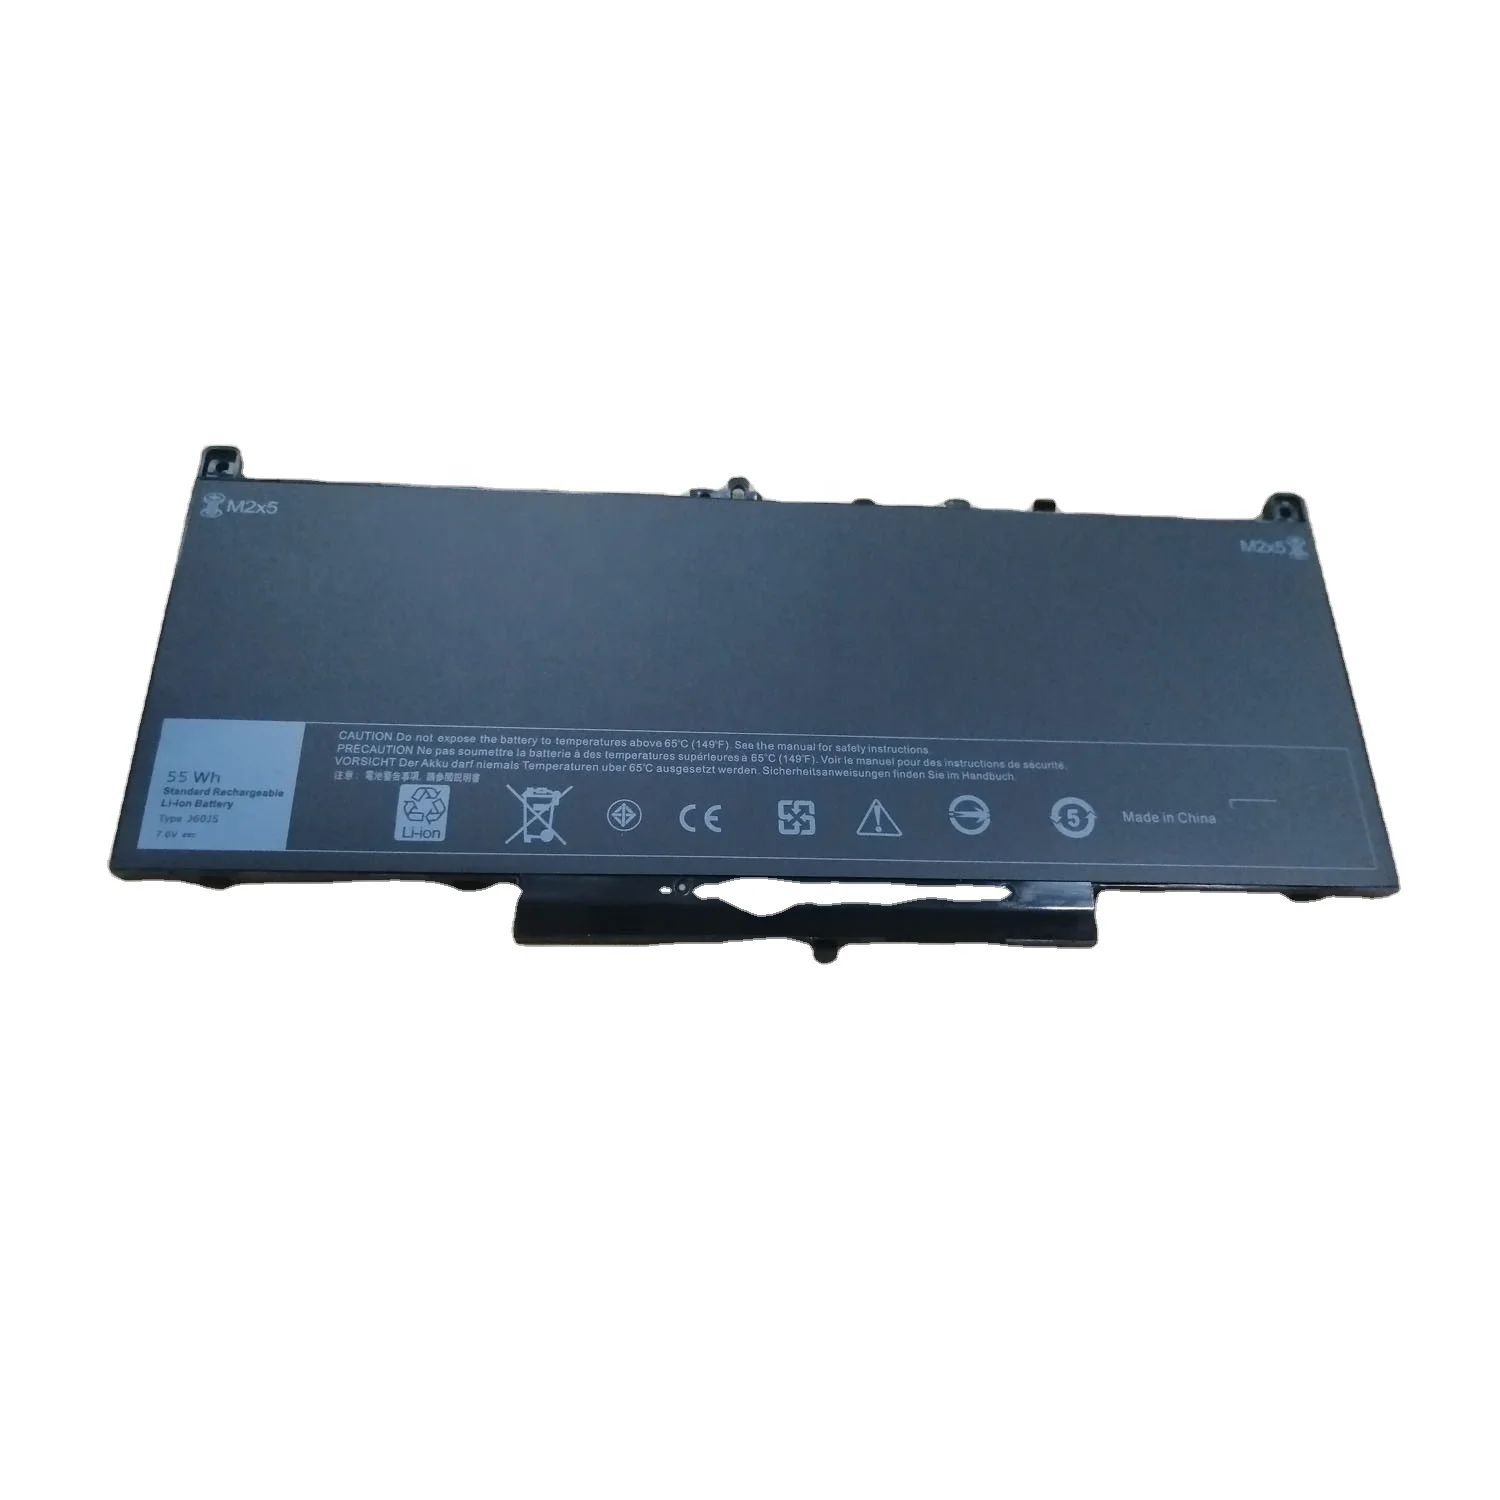 

MYIYAE J60J5 laptop battery lithium ion notebook batteries for Dell Latitude E7270 E7470 7.6V 55WH Compatible MC34Y 451-BBSY 242